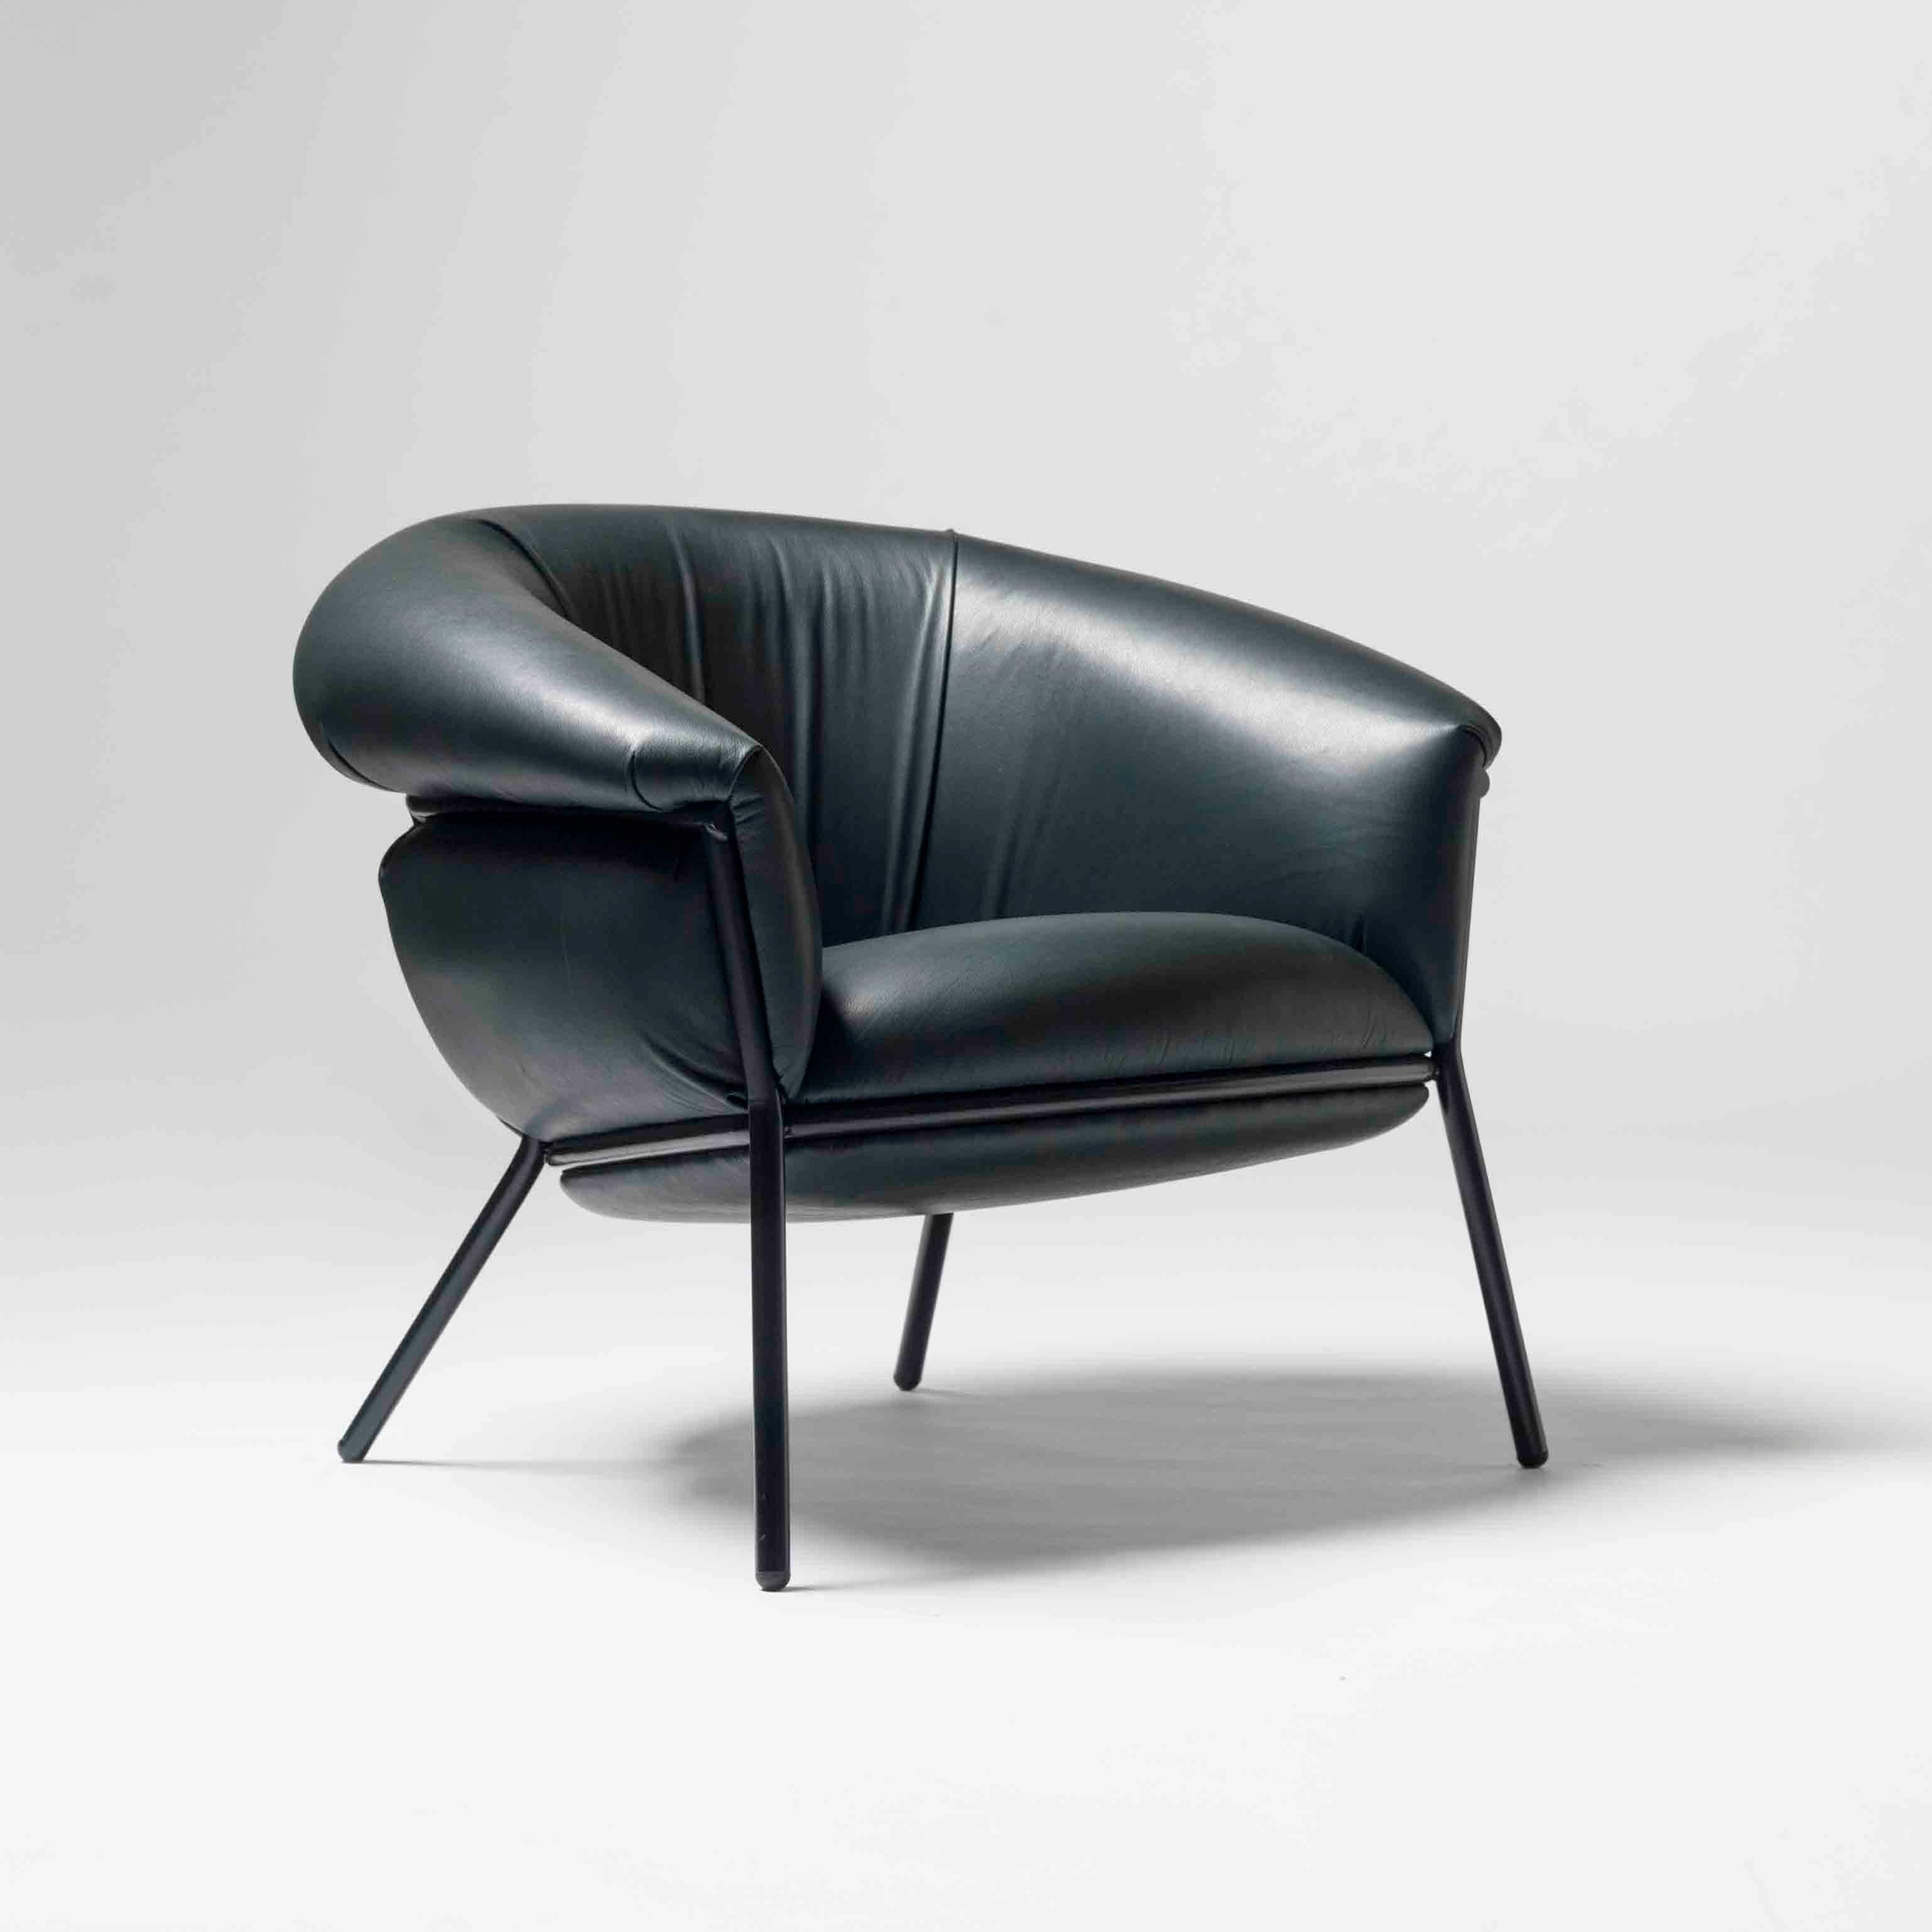 Lacquered Stephen Burks Contemporary Fabric Upholstered and Iron 'Grasso' Armchair for BD